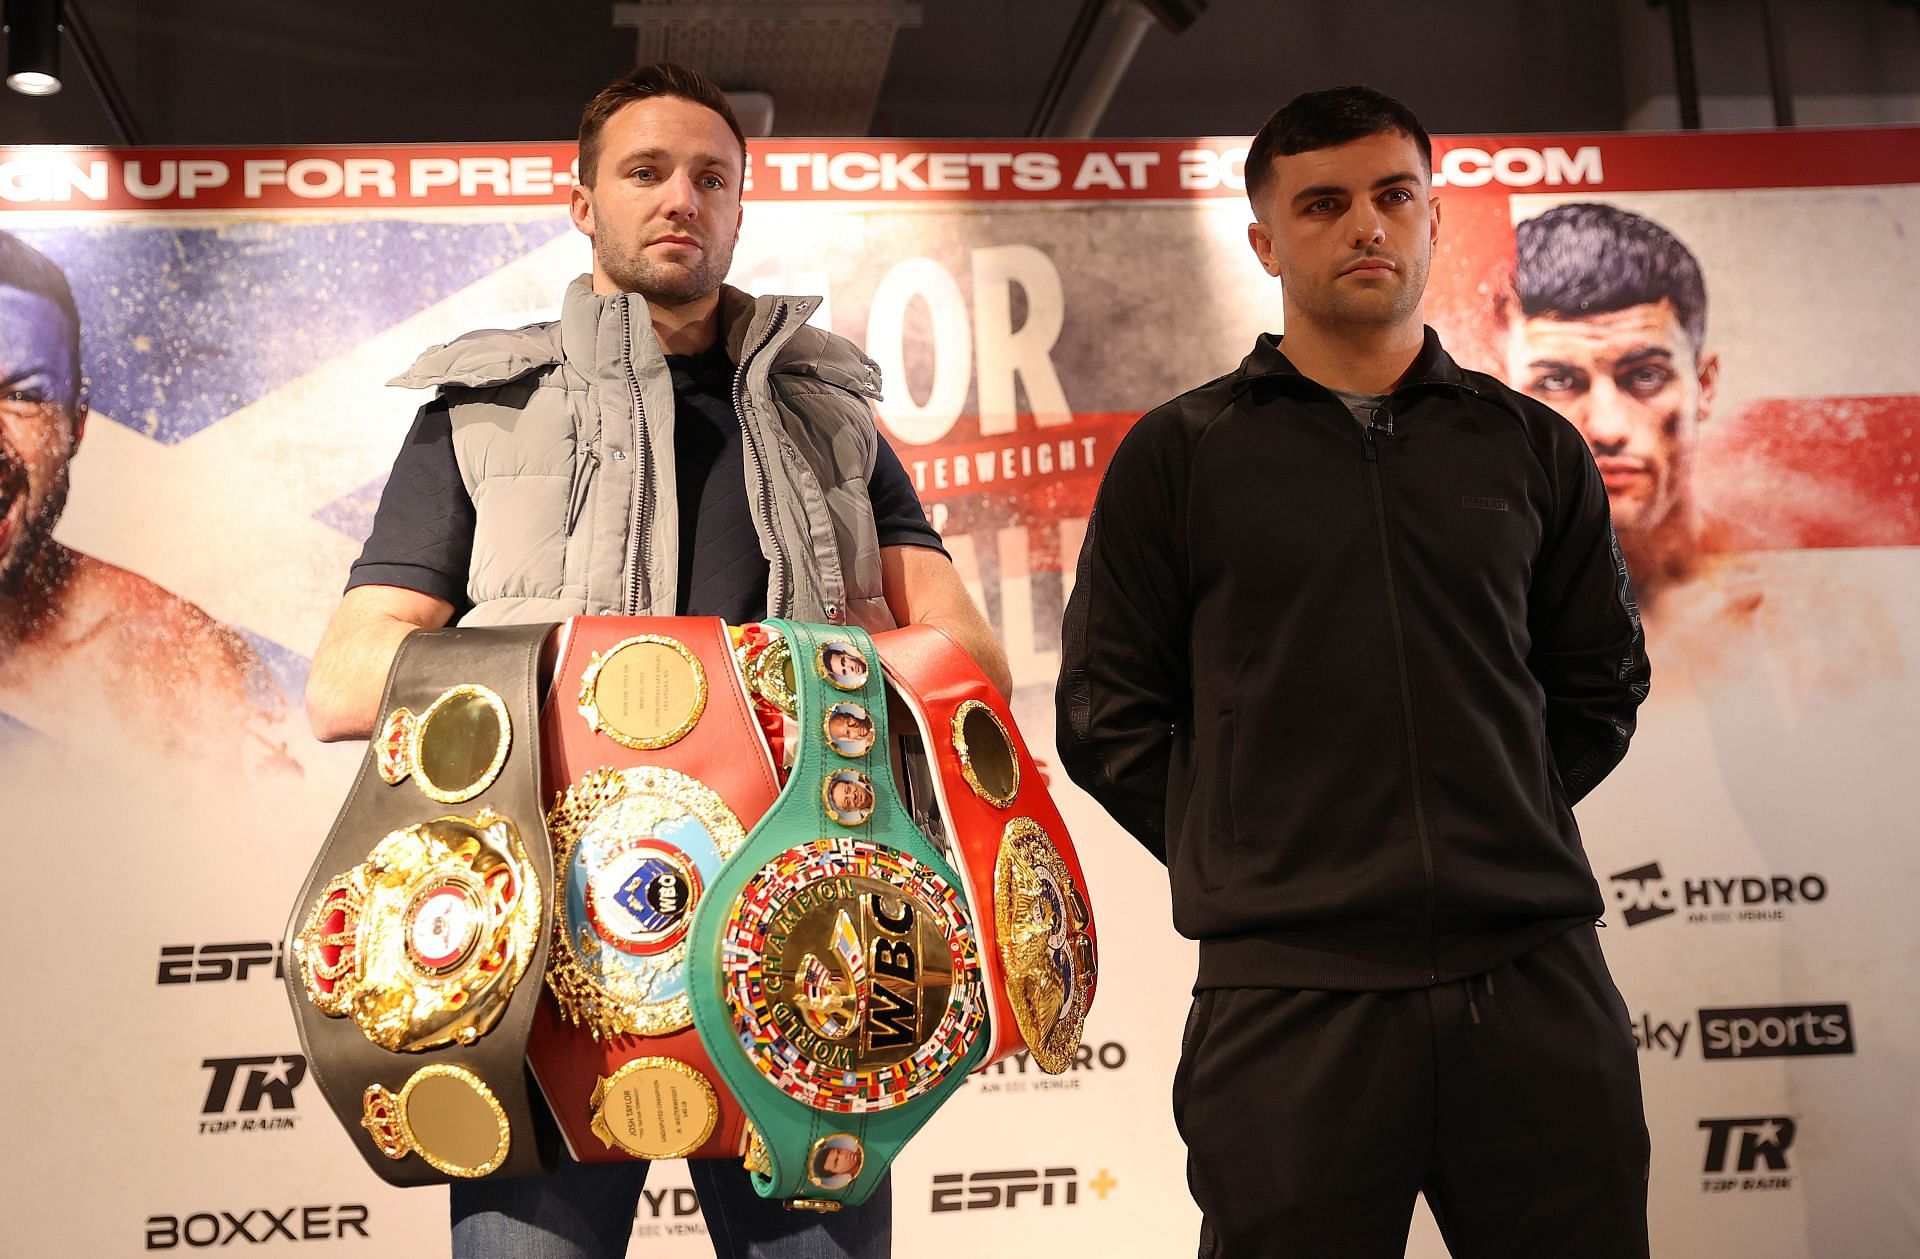 Josh Taylor vs. Jack Catterall bout will be investigated by the British Boxing Board of Control.